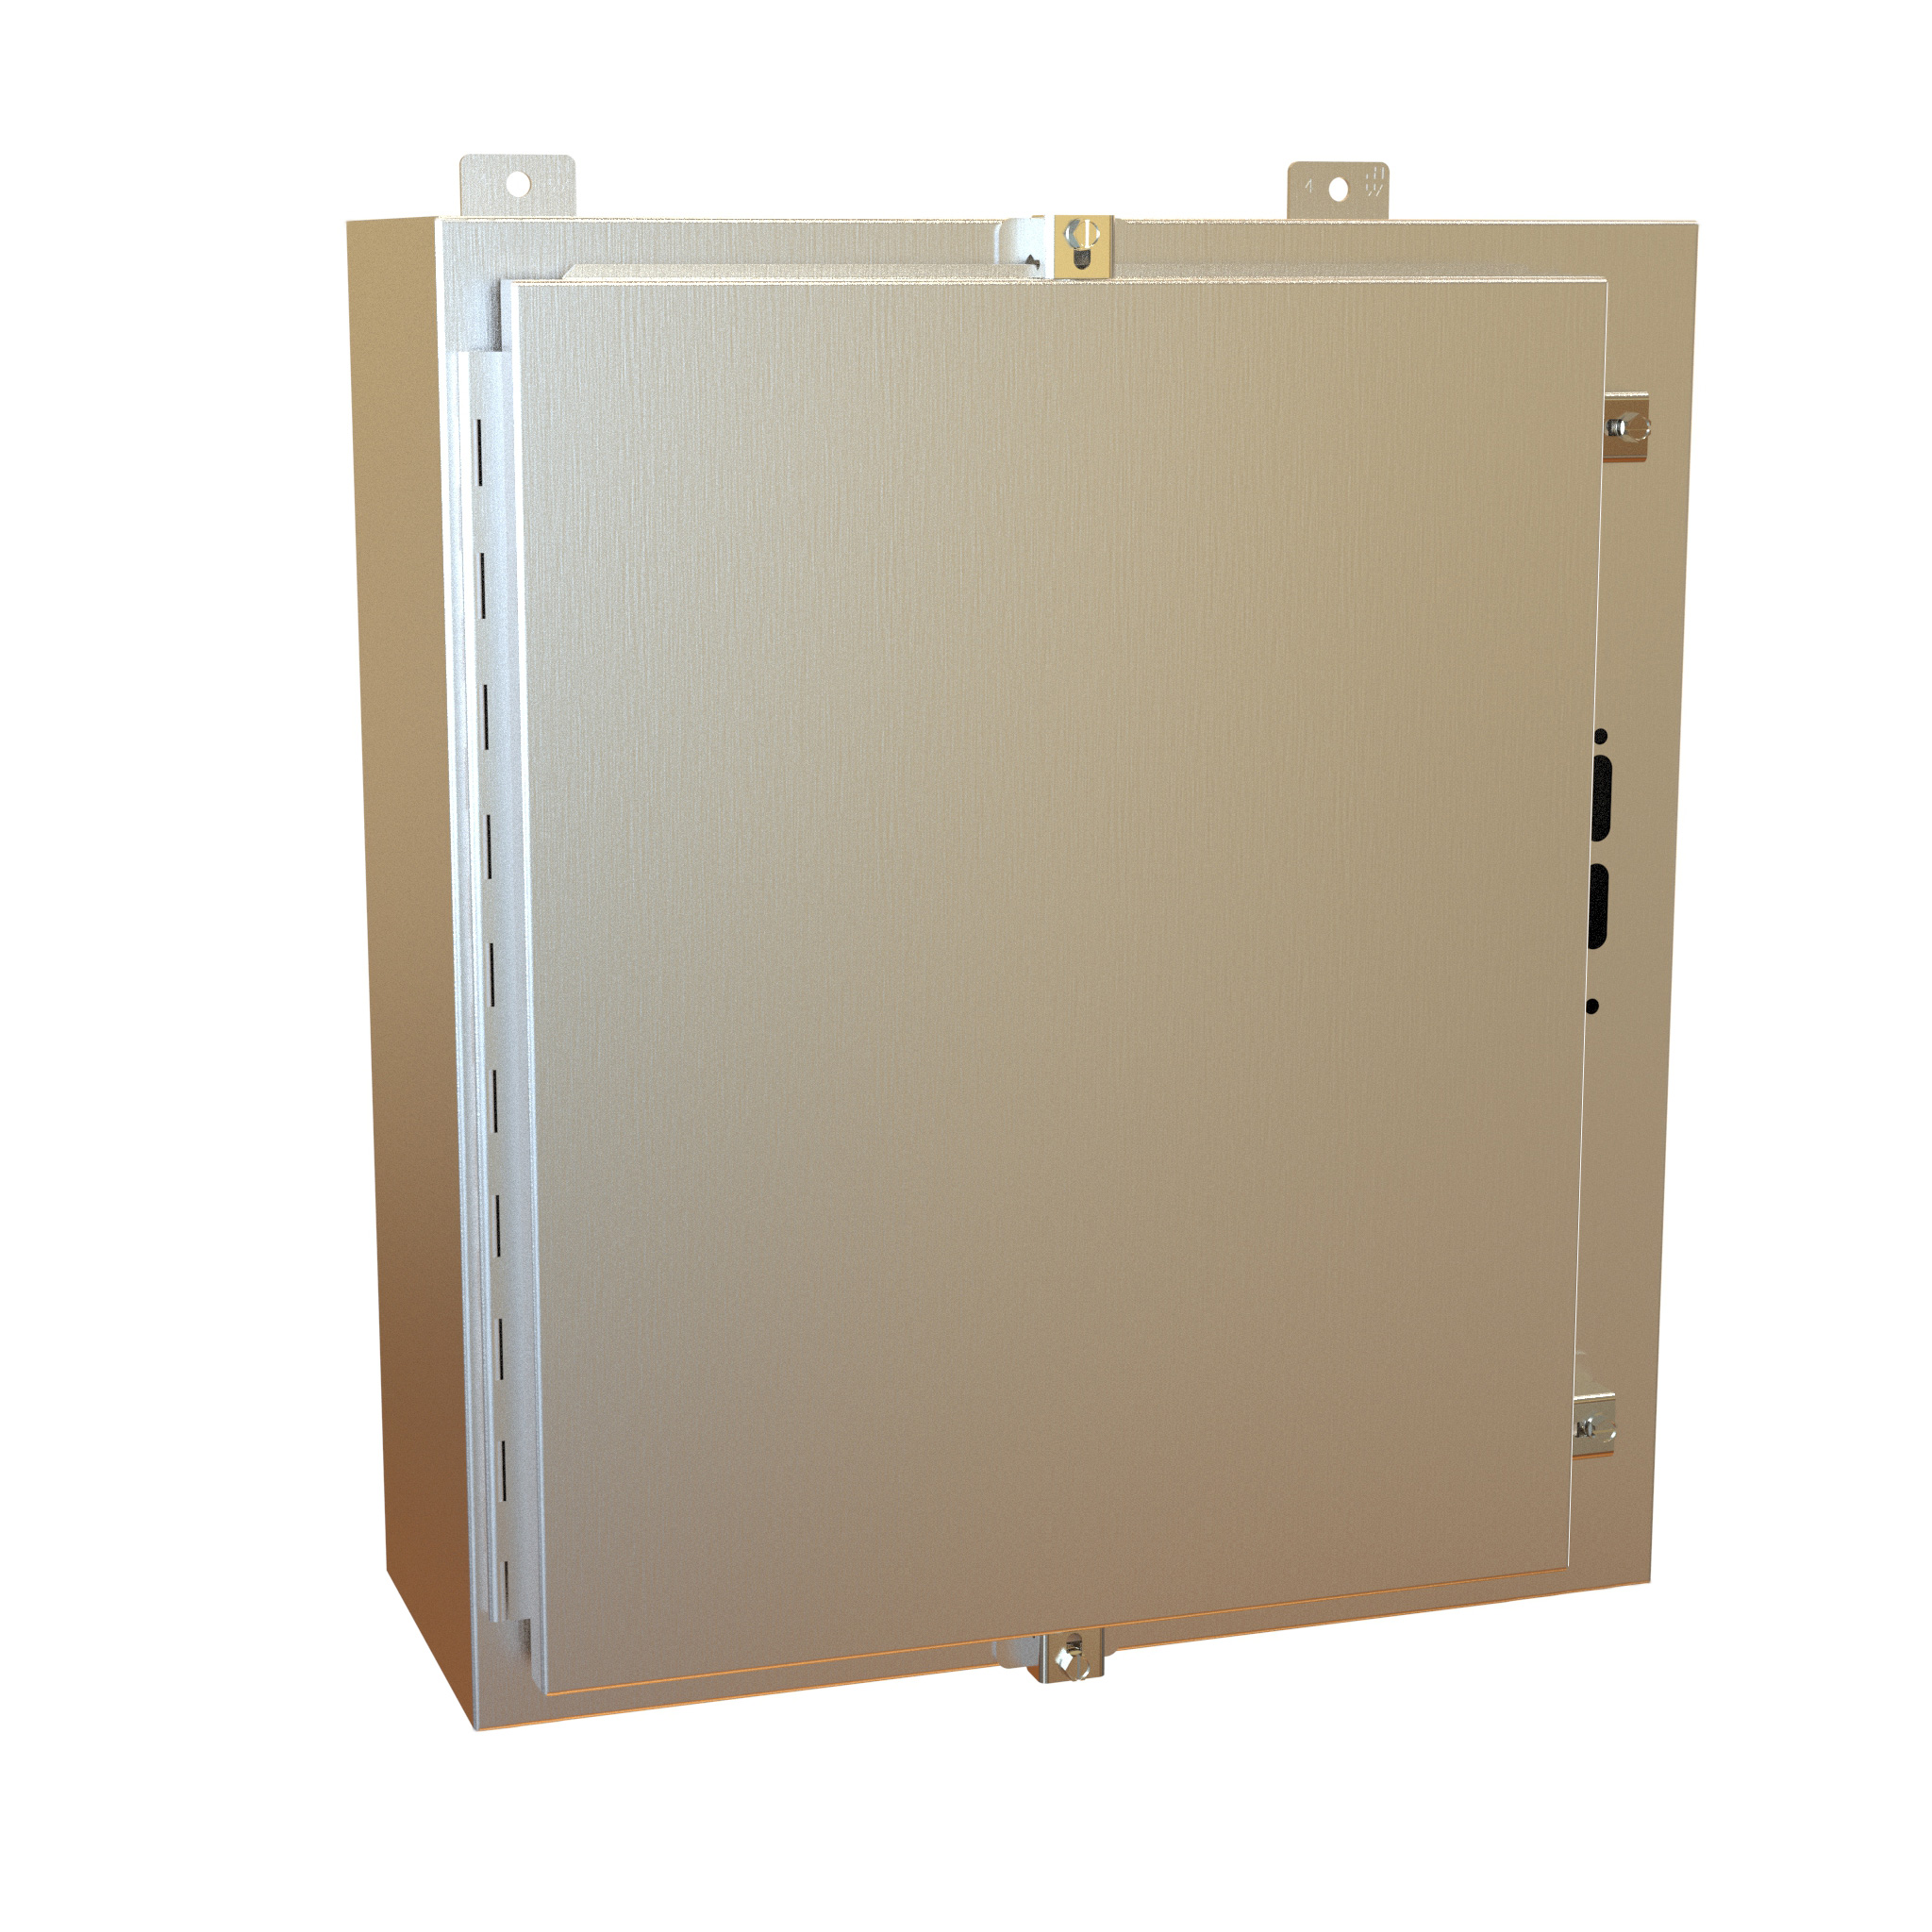 Type 4X Stainless Steel Wallmount Disconnect Enclosure 1447S N4 SS Series